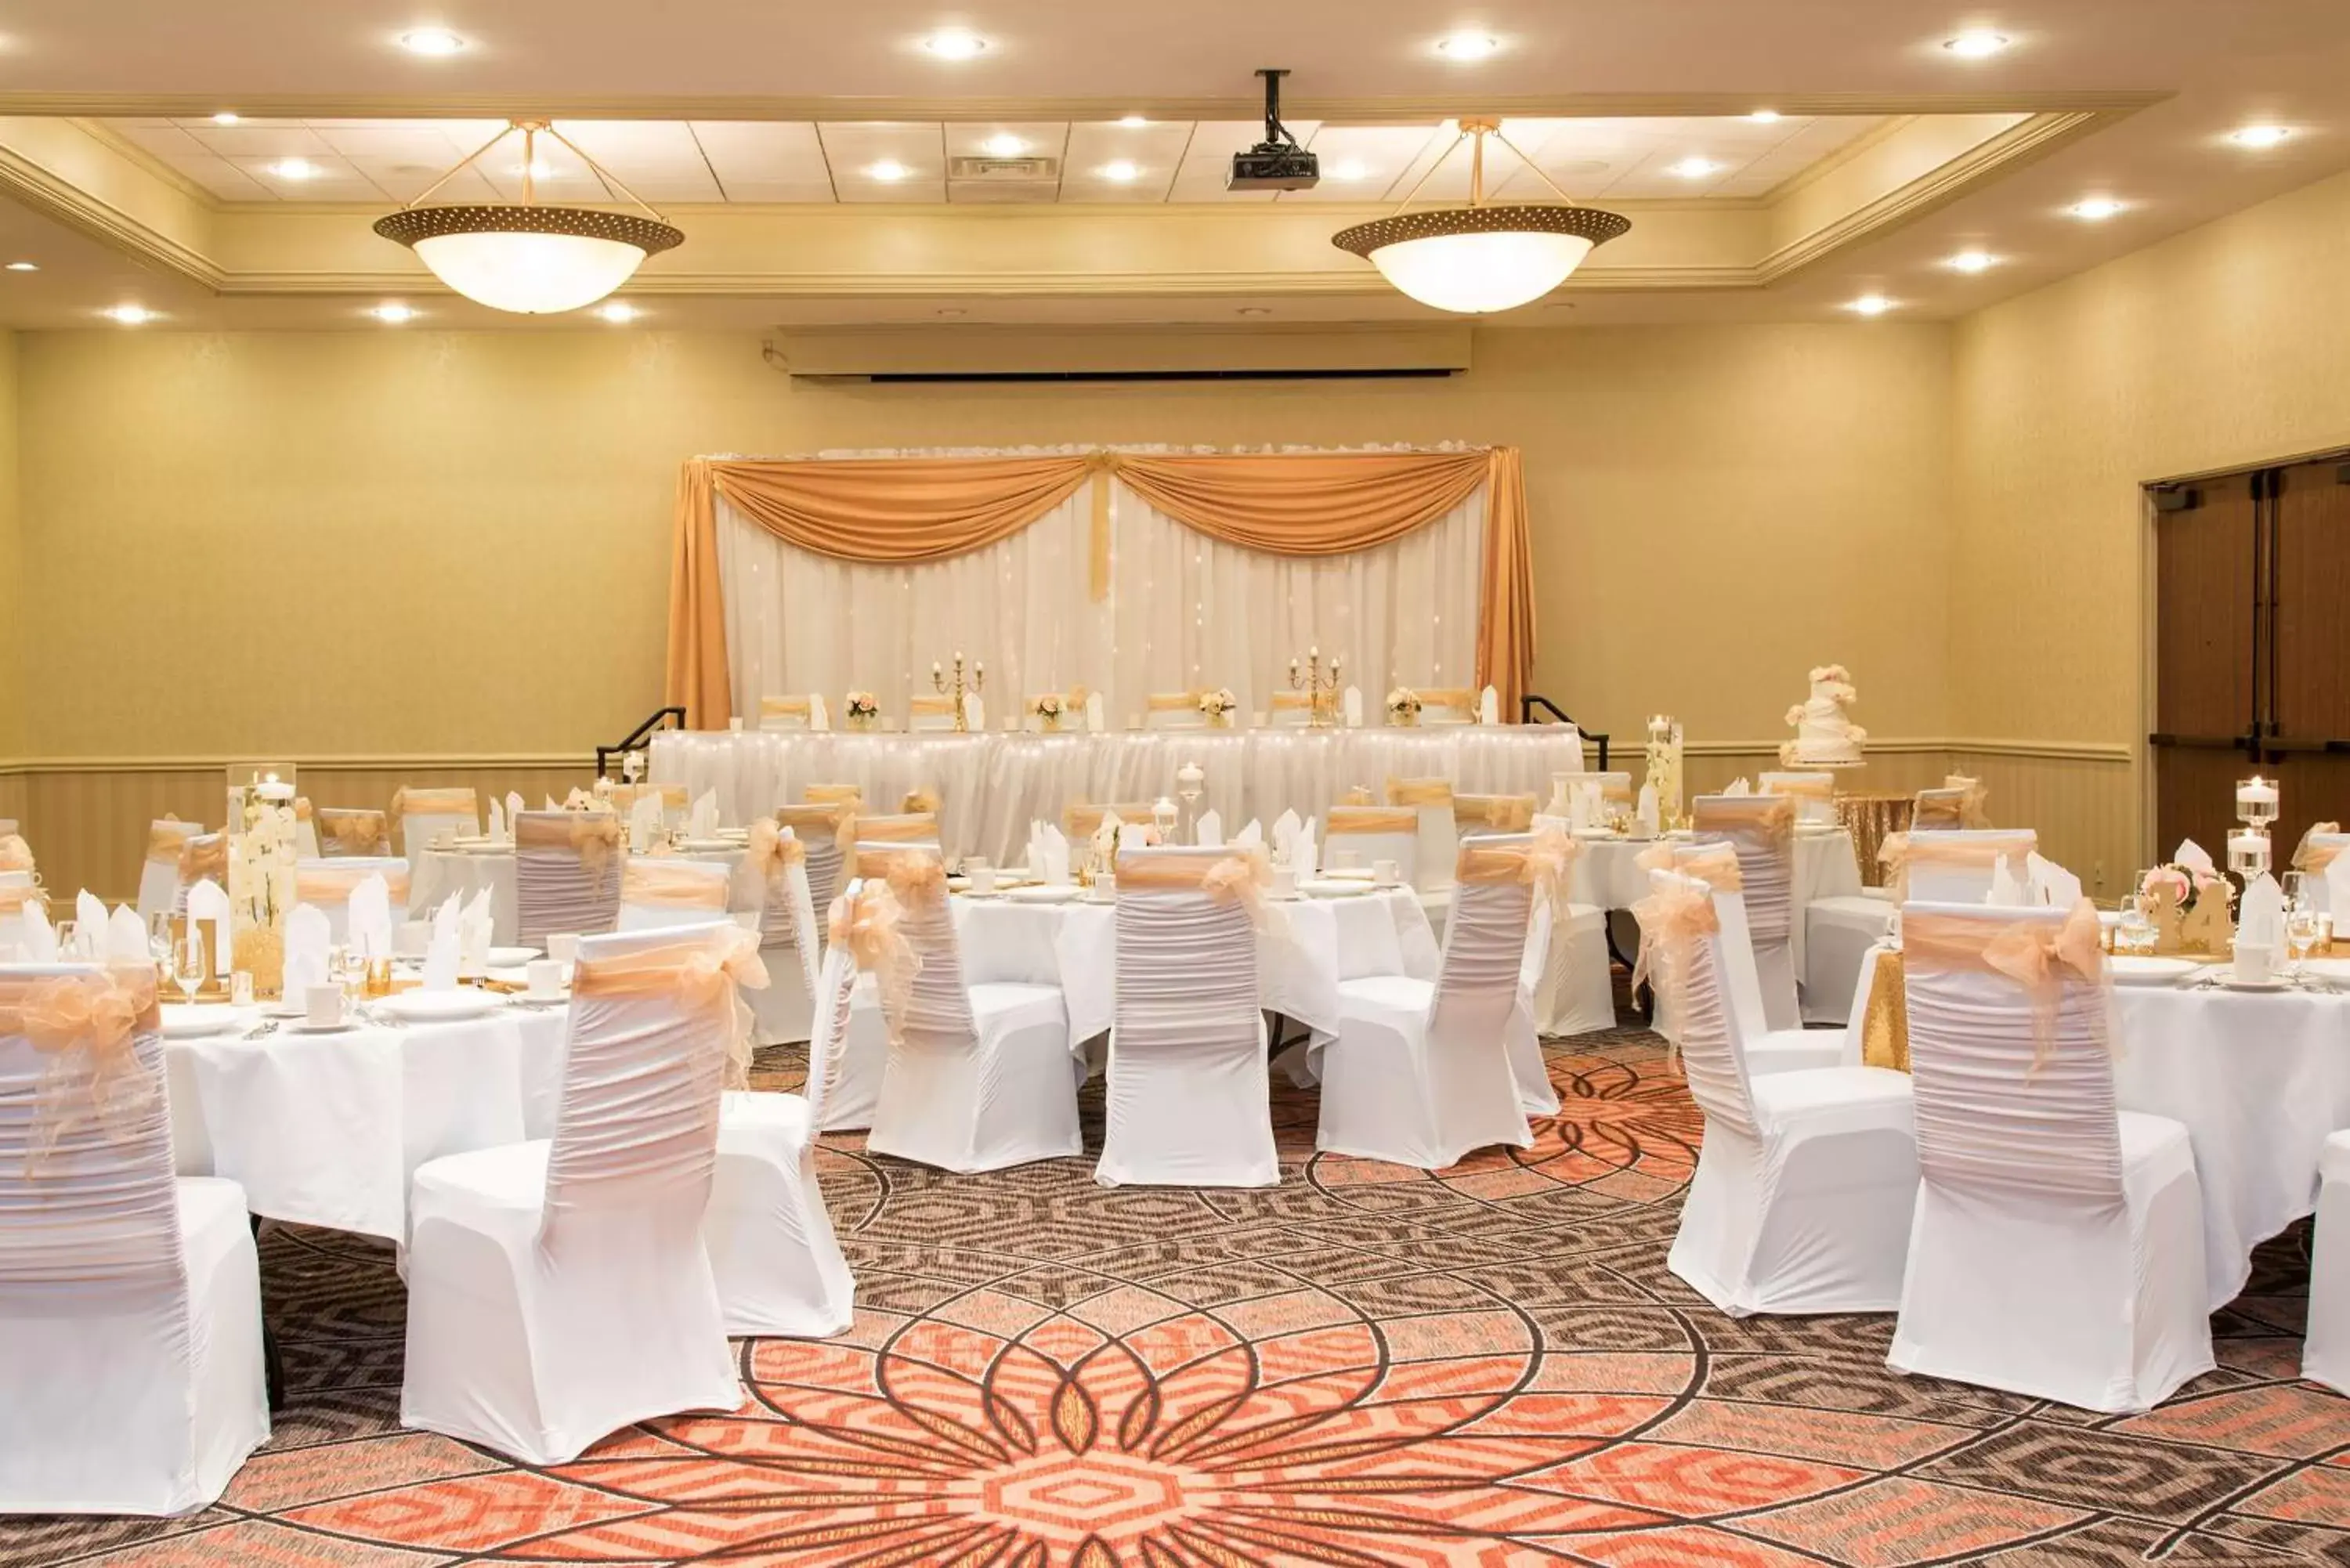 Meeting/conference room, Banquet Facilities in DoubleTree by Hilton Hotel Grand Rapids Airport